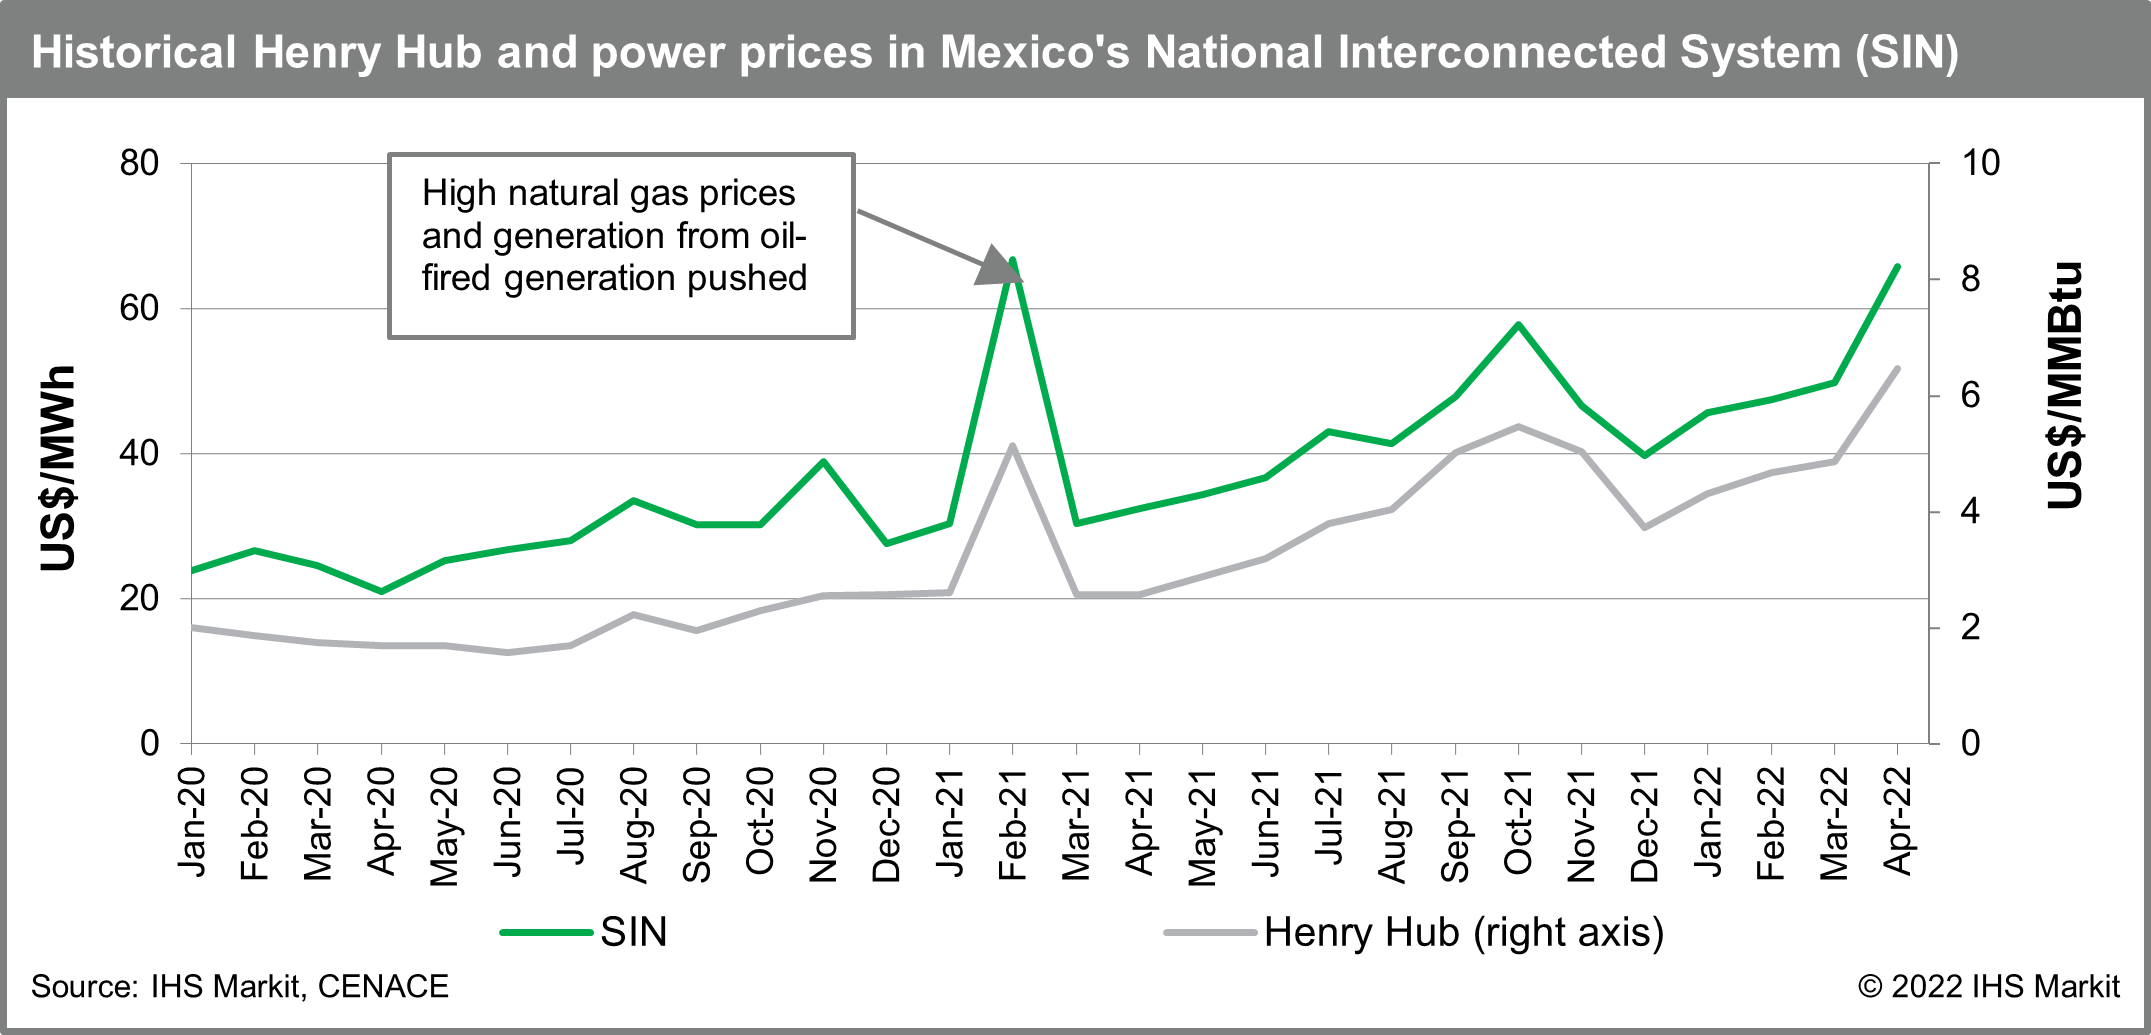 Historical Henry Hub and power prices in Mexico's National Interconnected System (SIN)